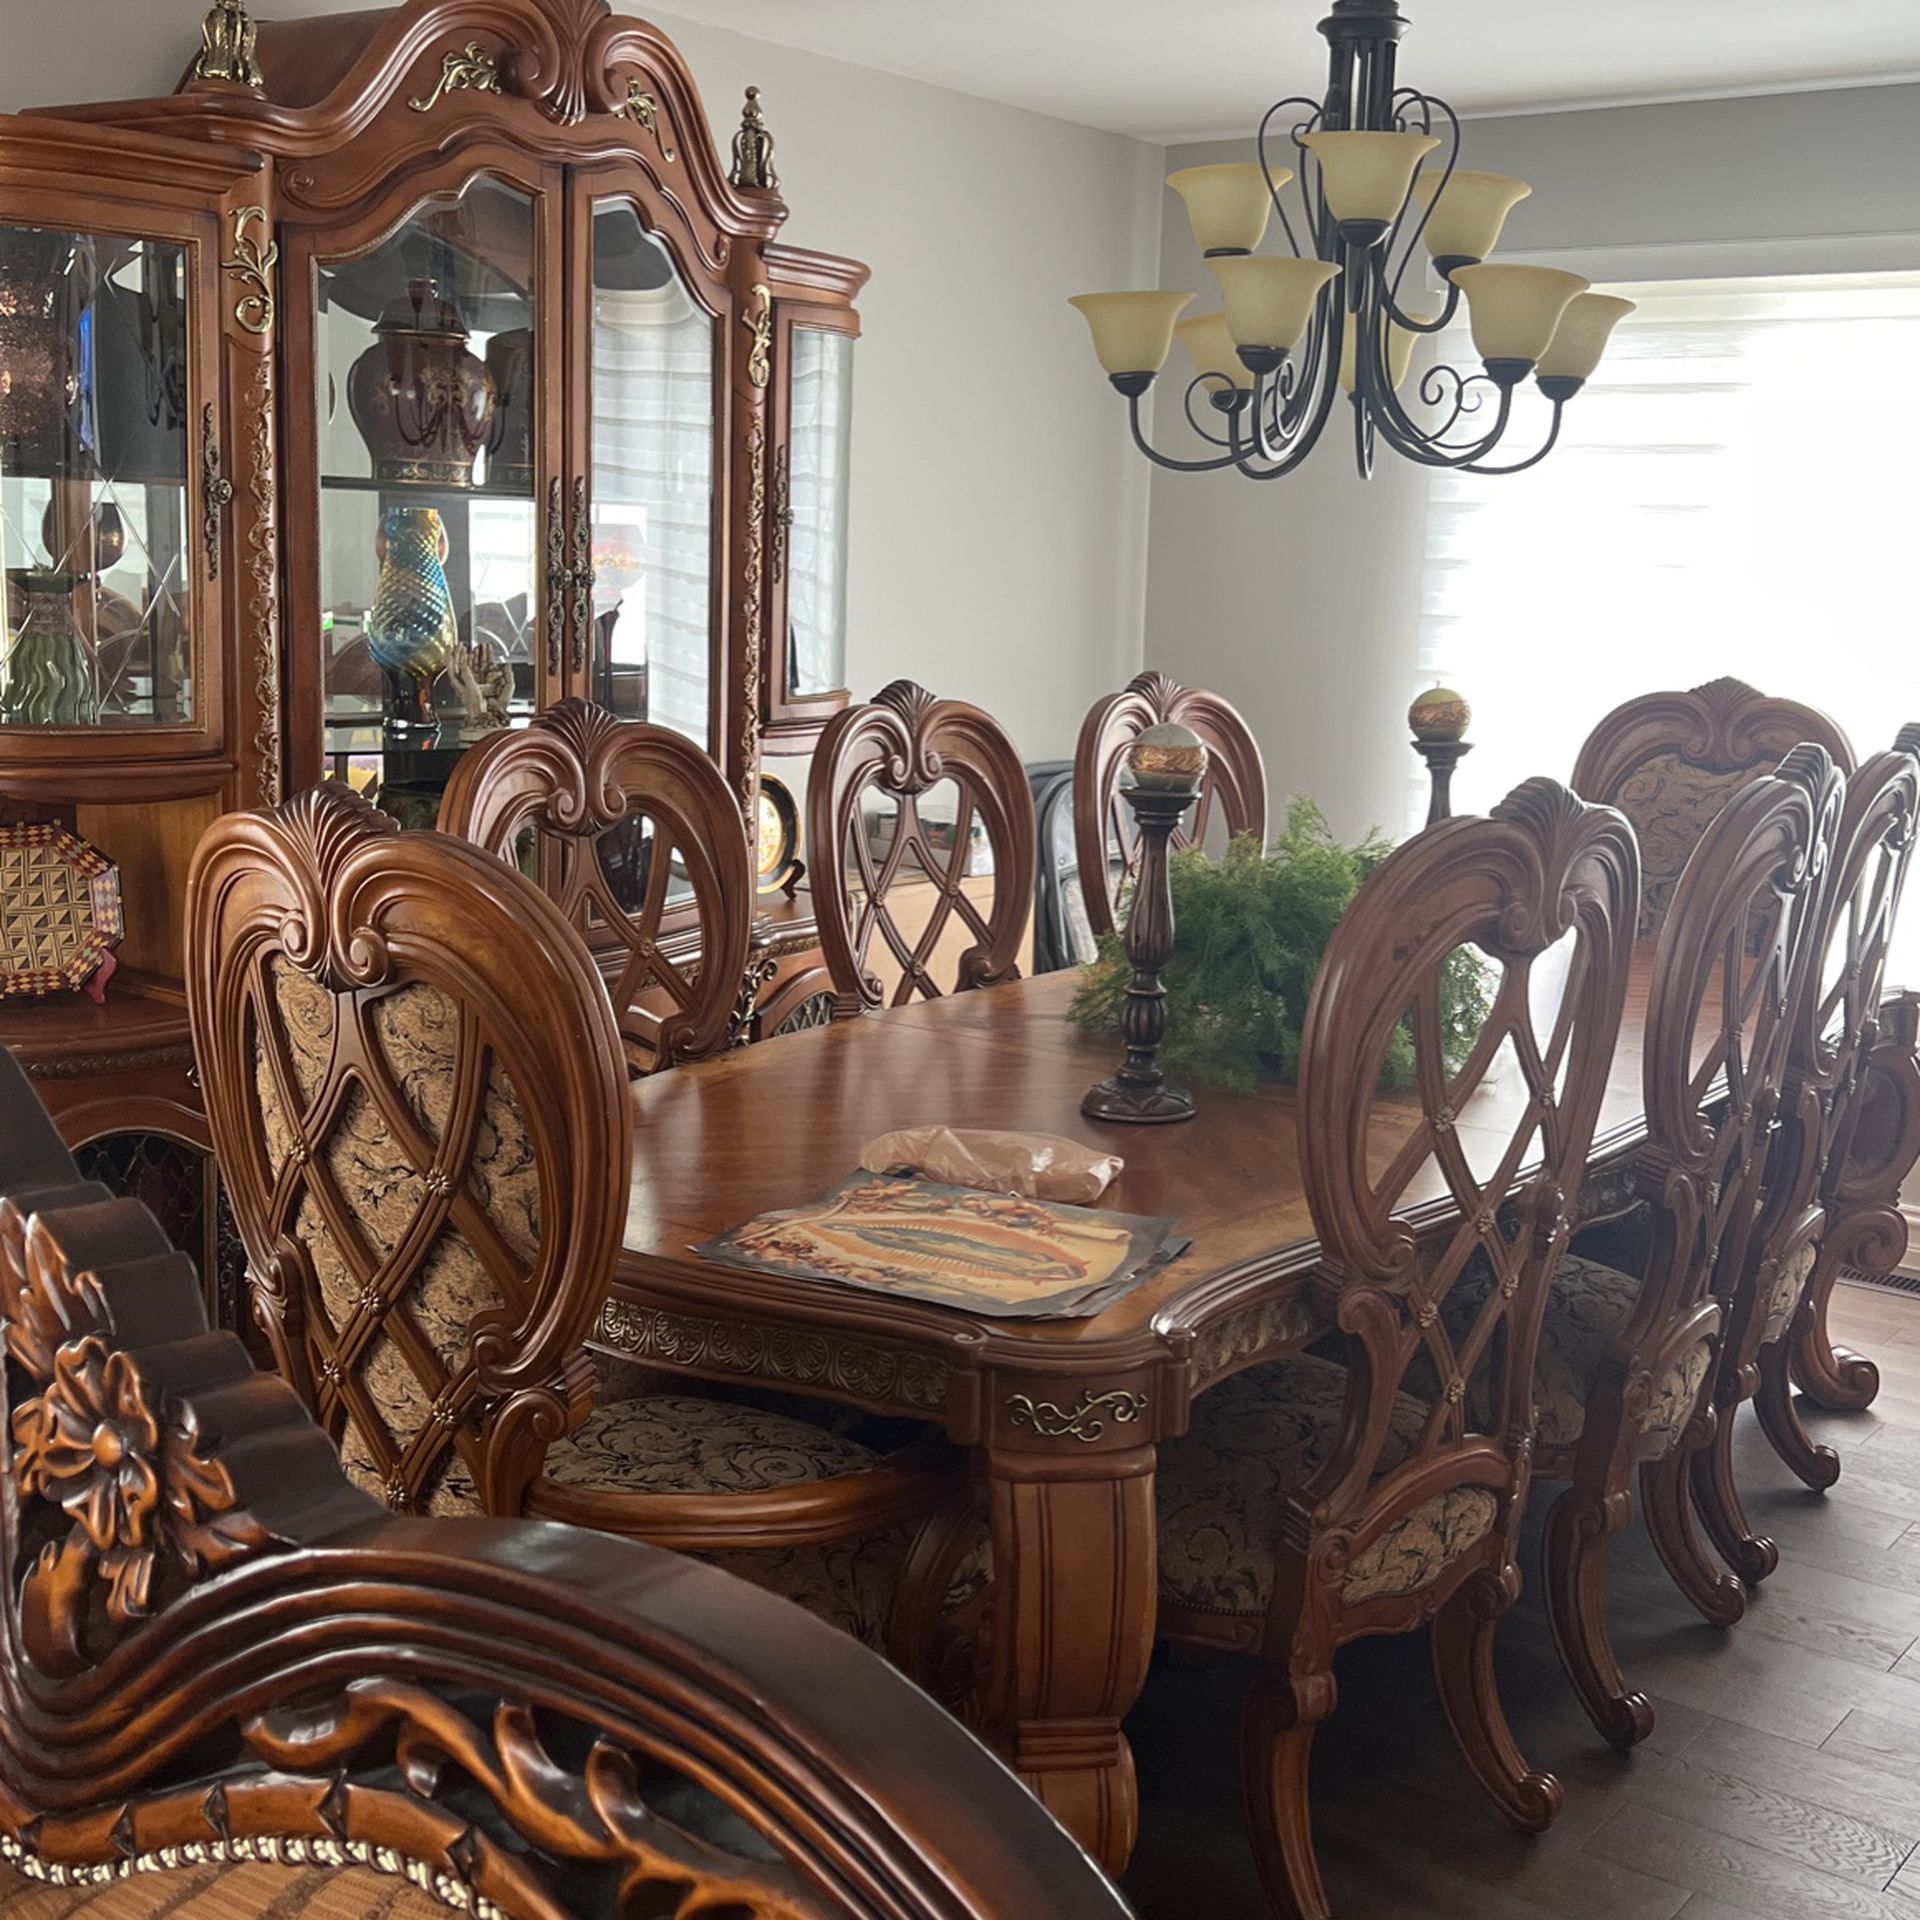 8 Piece Dining Table With Chairs And Big Armoire 